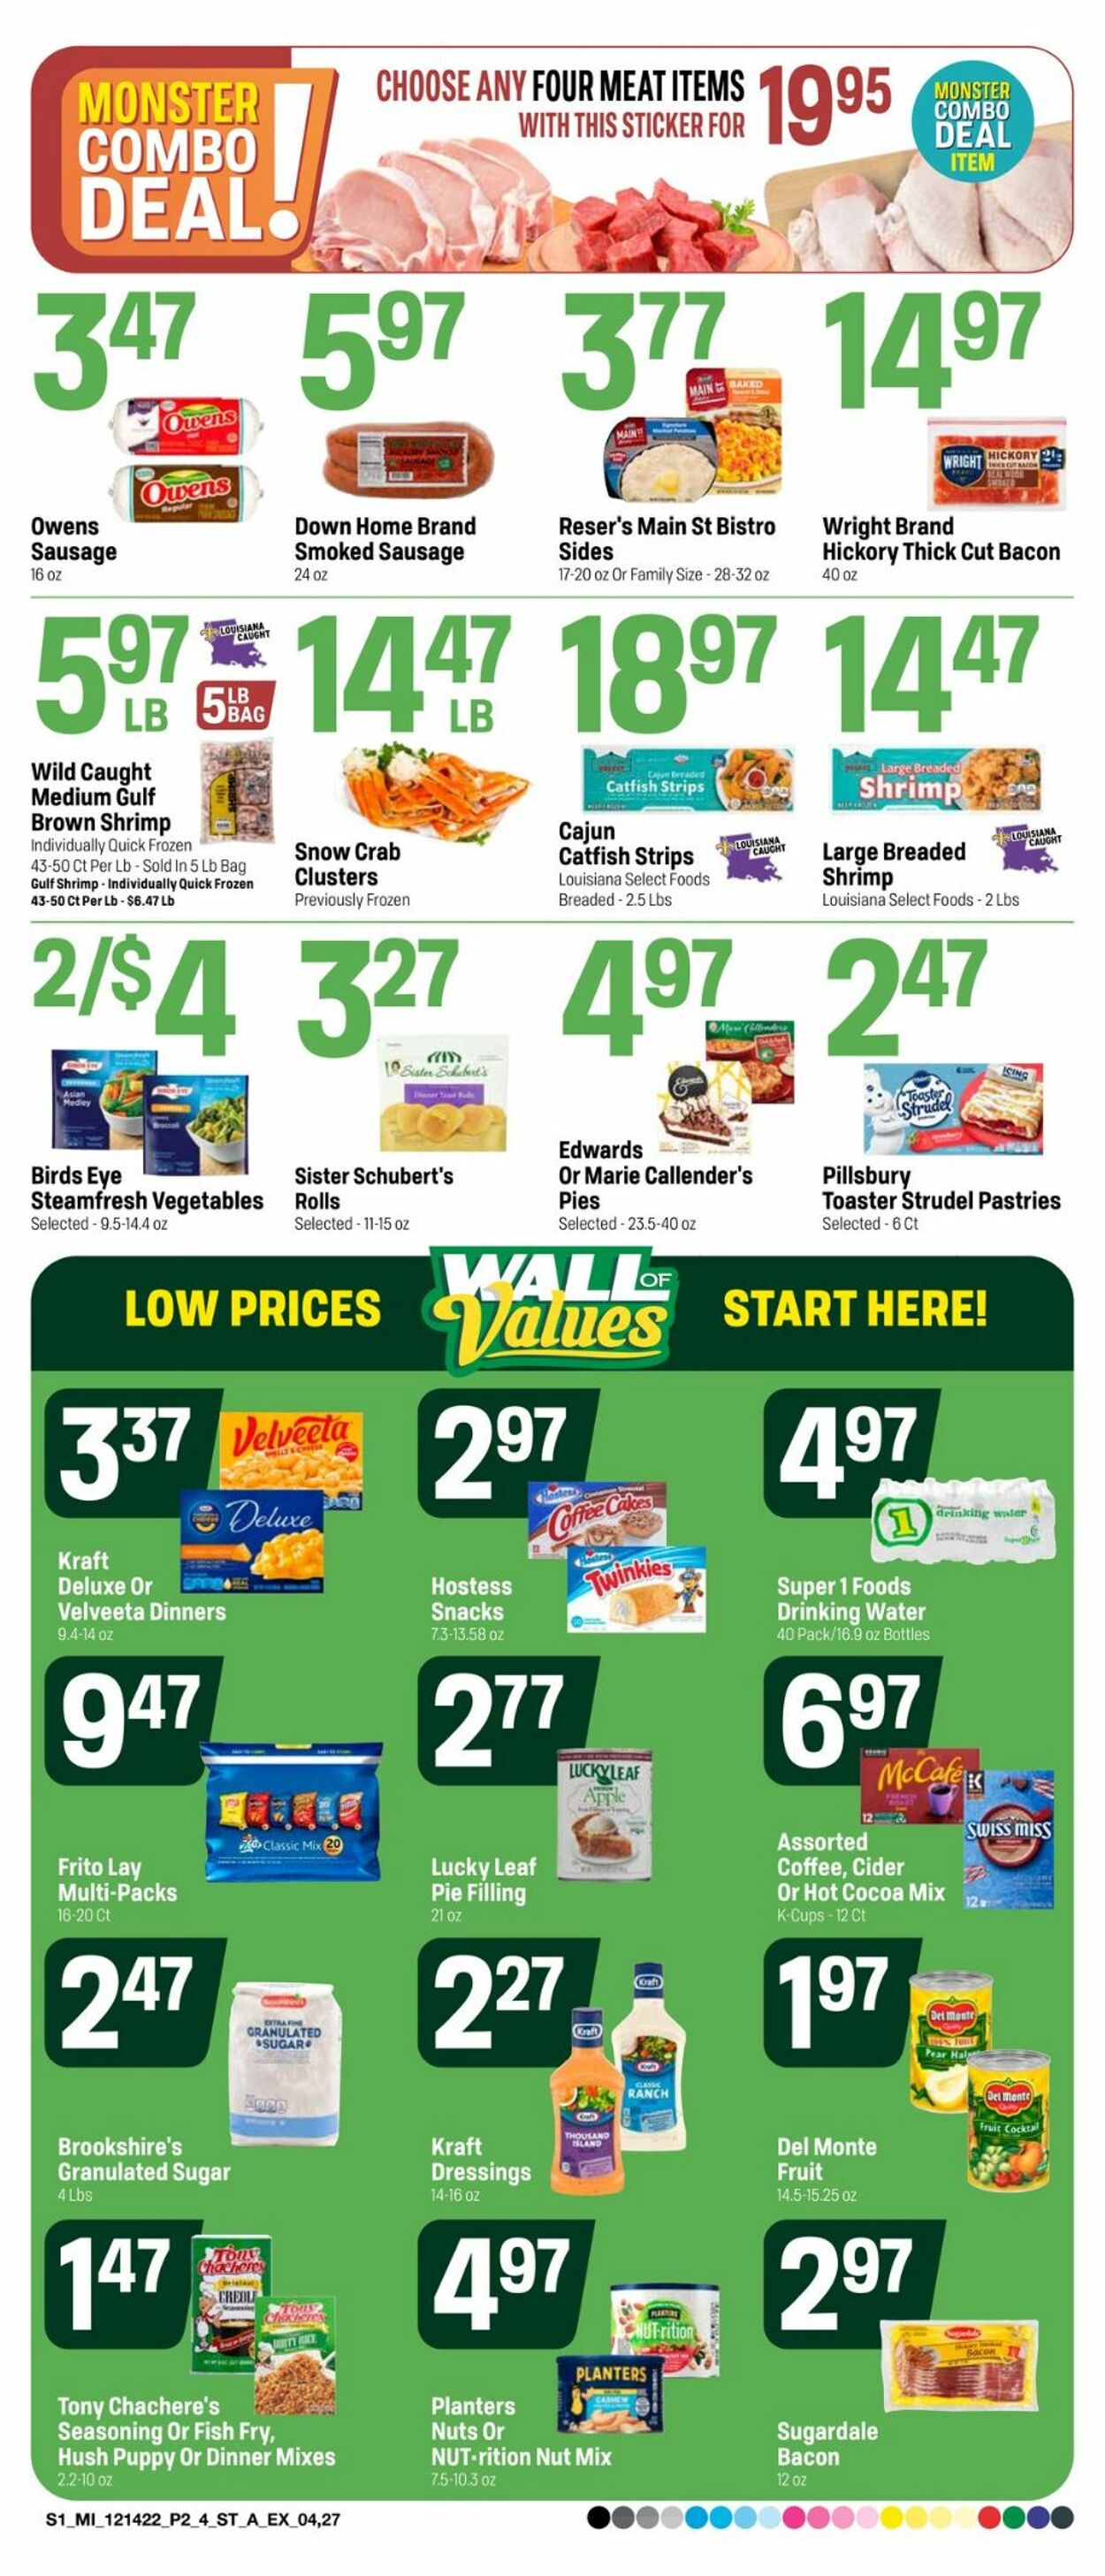 Super 1 Foods Ad from 12/14/2022